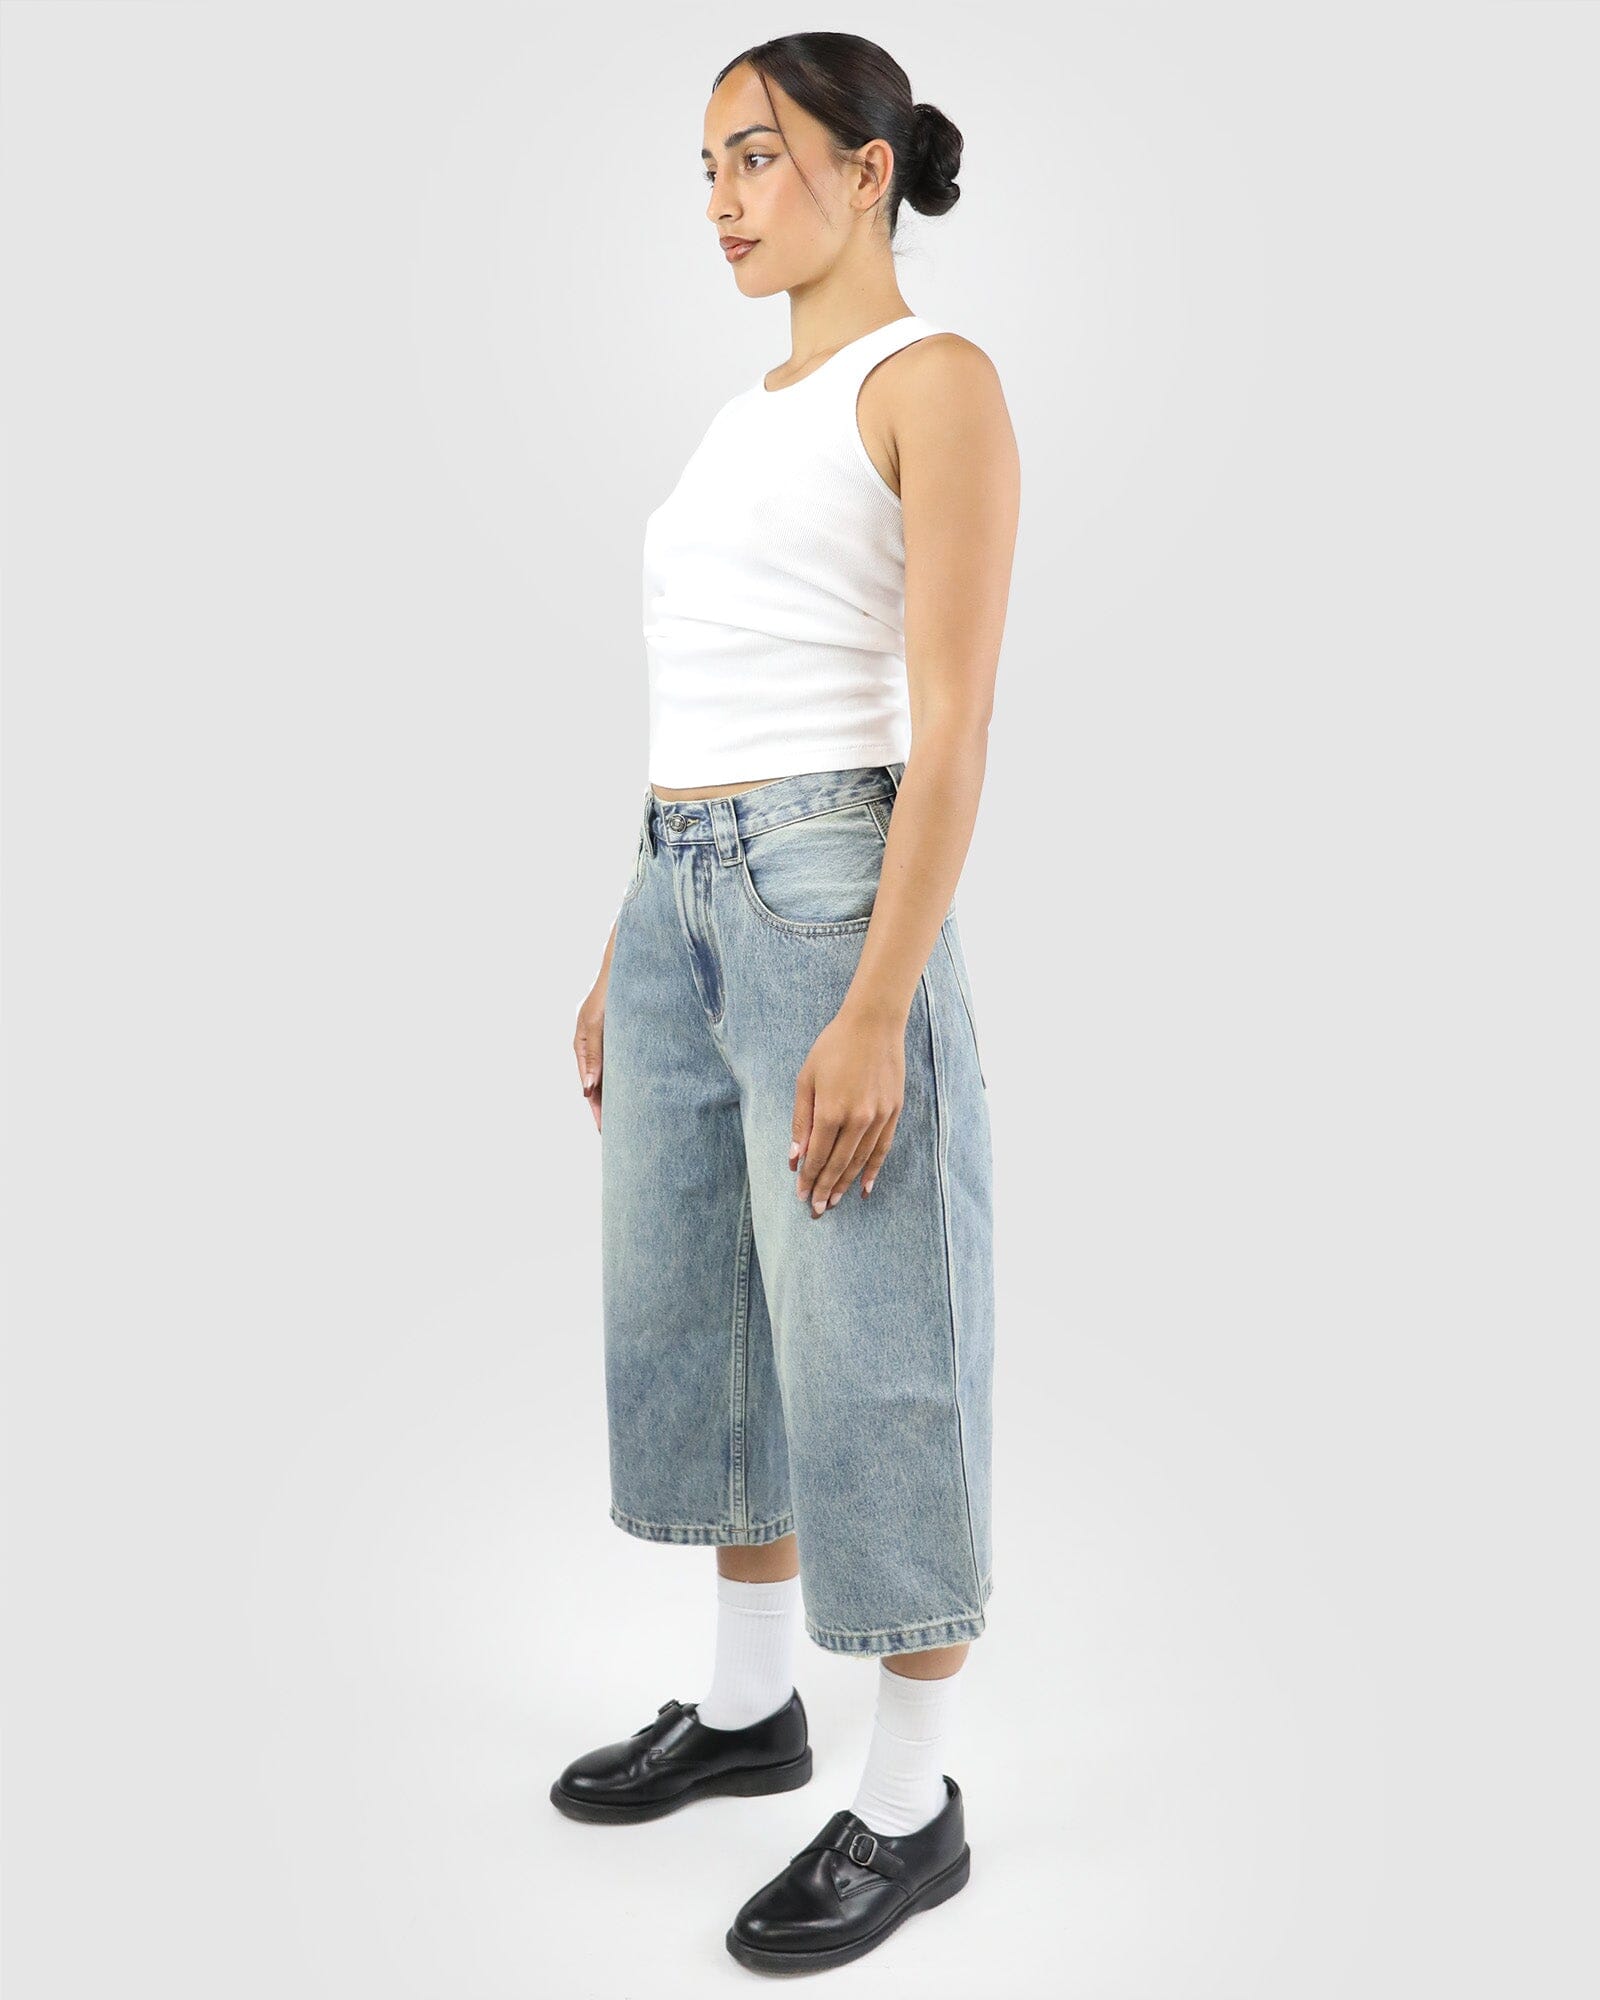 Relaxed 90's Long Jort: Weathered